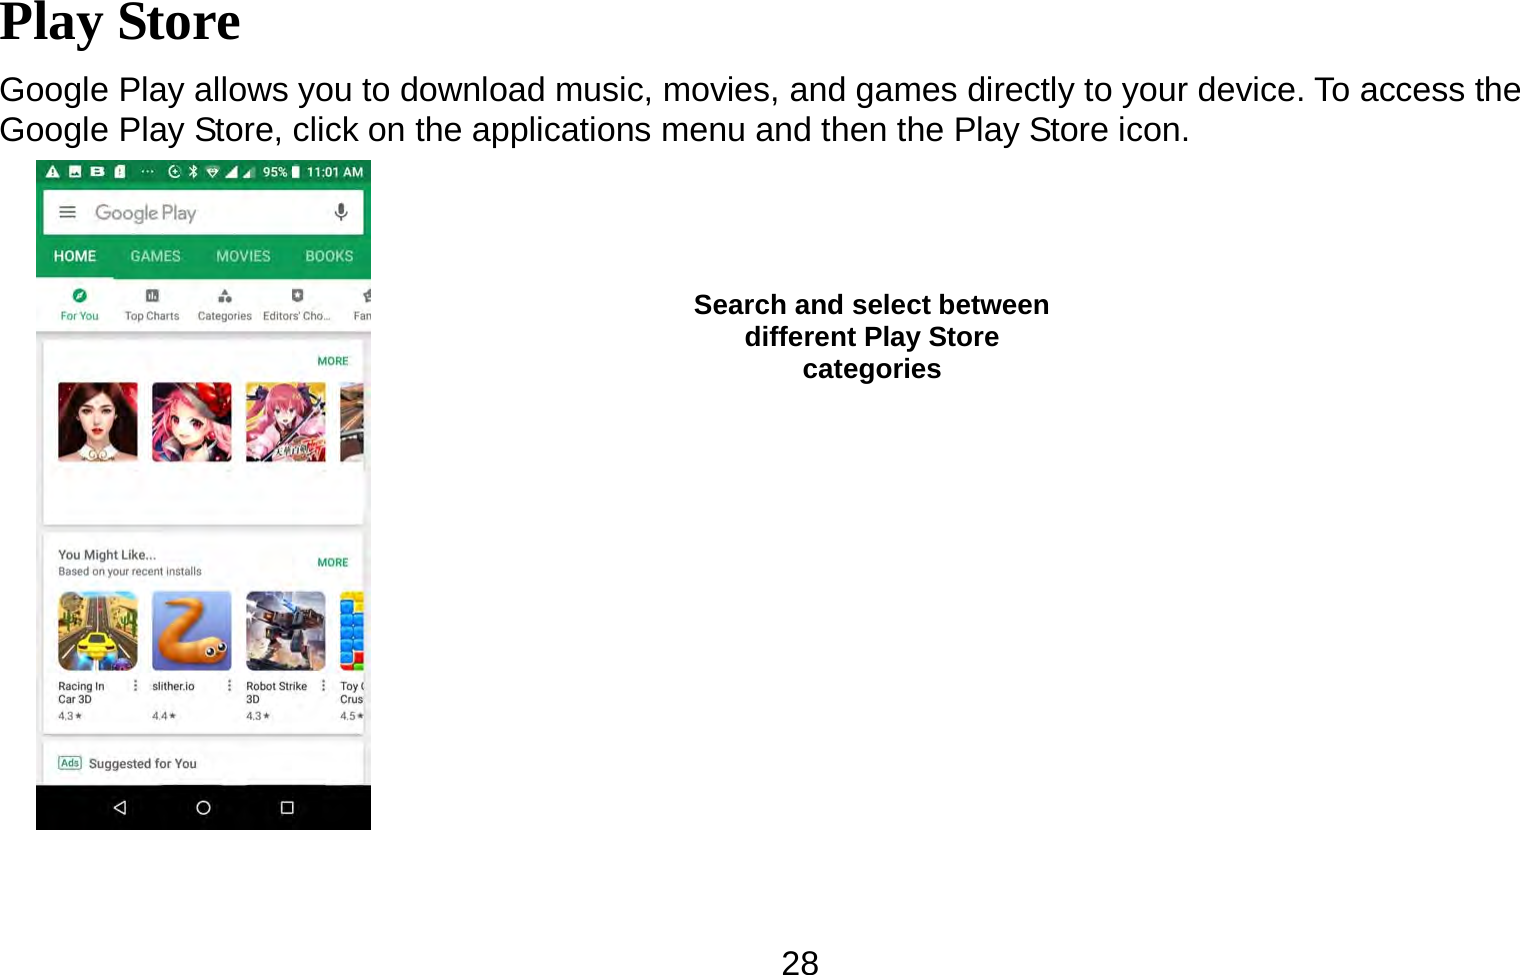   28Play Store Google Play allows you to download music, movies, and games directly to your device. To access the Google Play Store, click on the applications menu and then the Play Store icon.   Search and select between different Play Store categories 